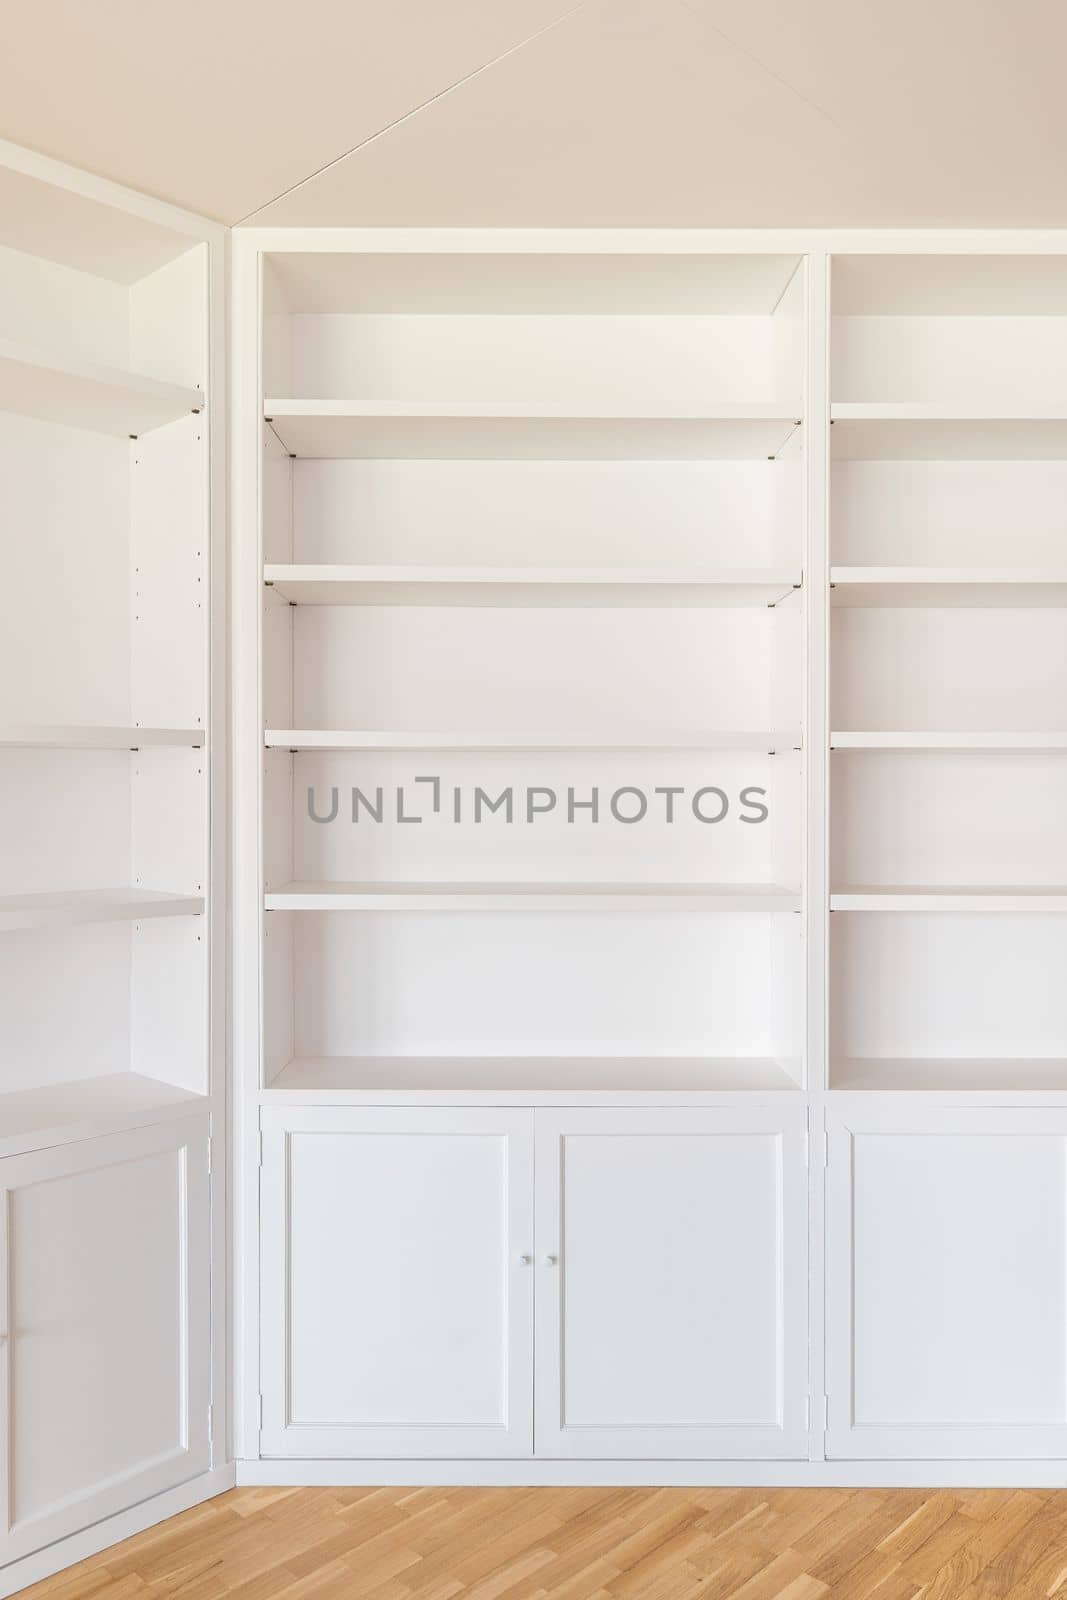 White wardrobes from floor to ceiling along the walls in the room. Many shelves for various interior items, books. From below lockers with doors for clothes, bed linen. The floor is wooden parquet